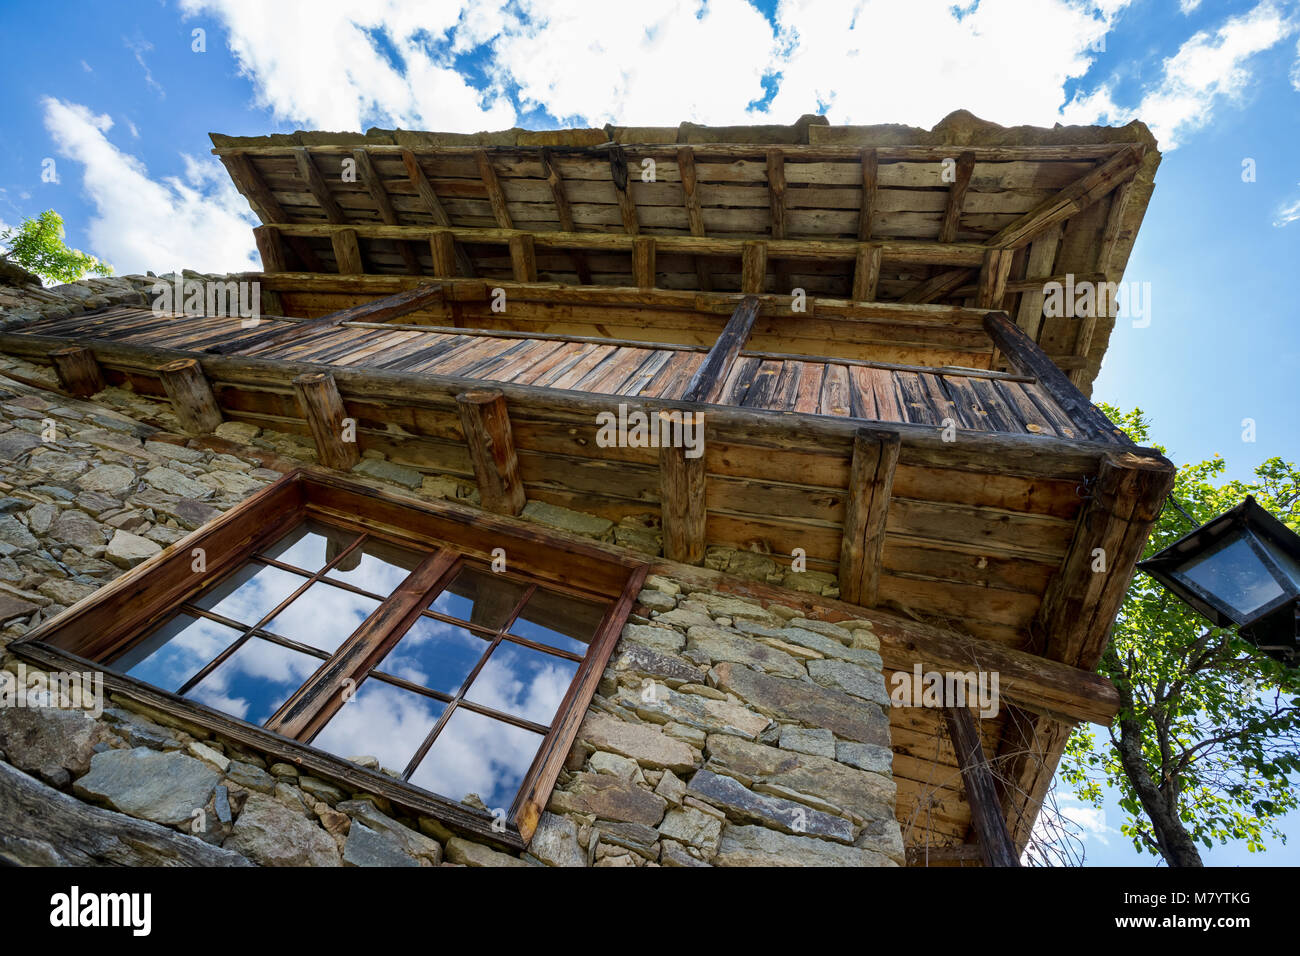 Window Cloud Reflections Old Stone And Wood House Stock Photo